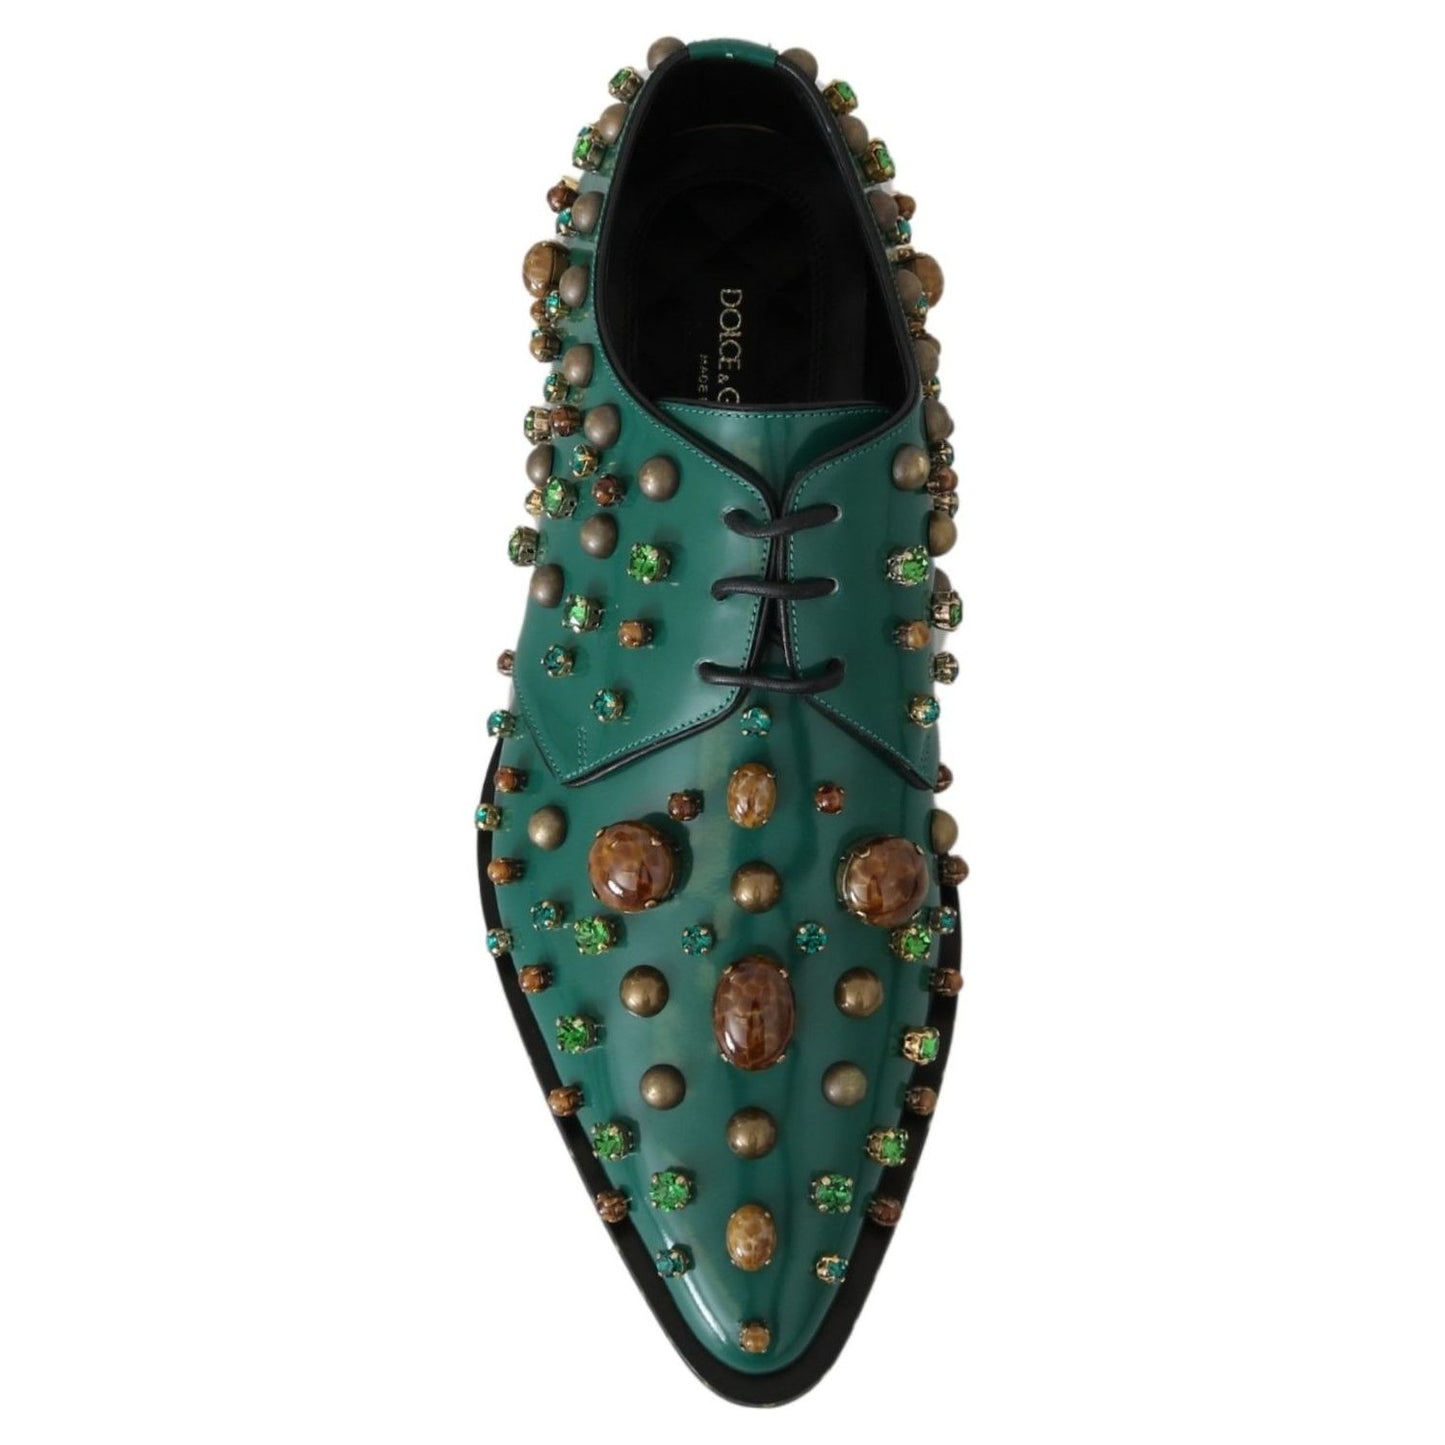 Dolce & Gabbana Emerald Leather Dress Shoes with Crystal Accents green-leather-crystal-dress-broque-shoes